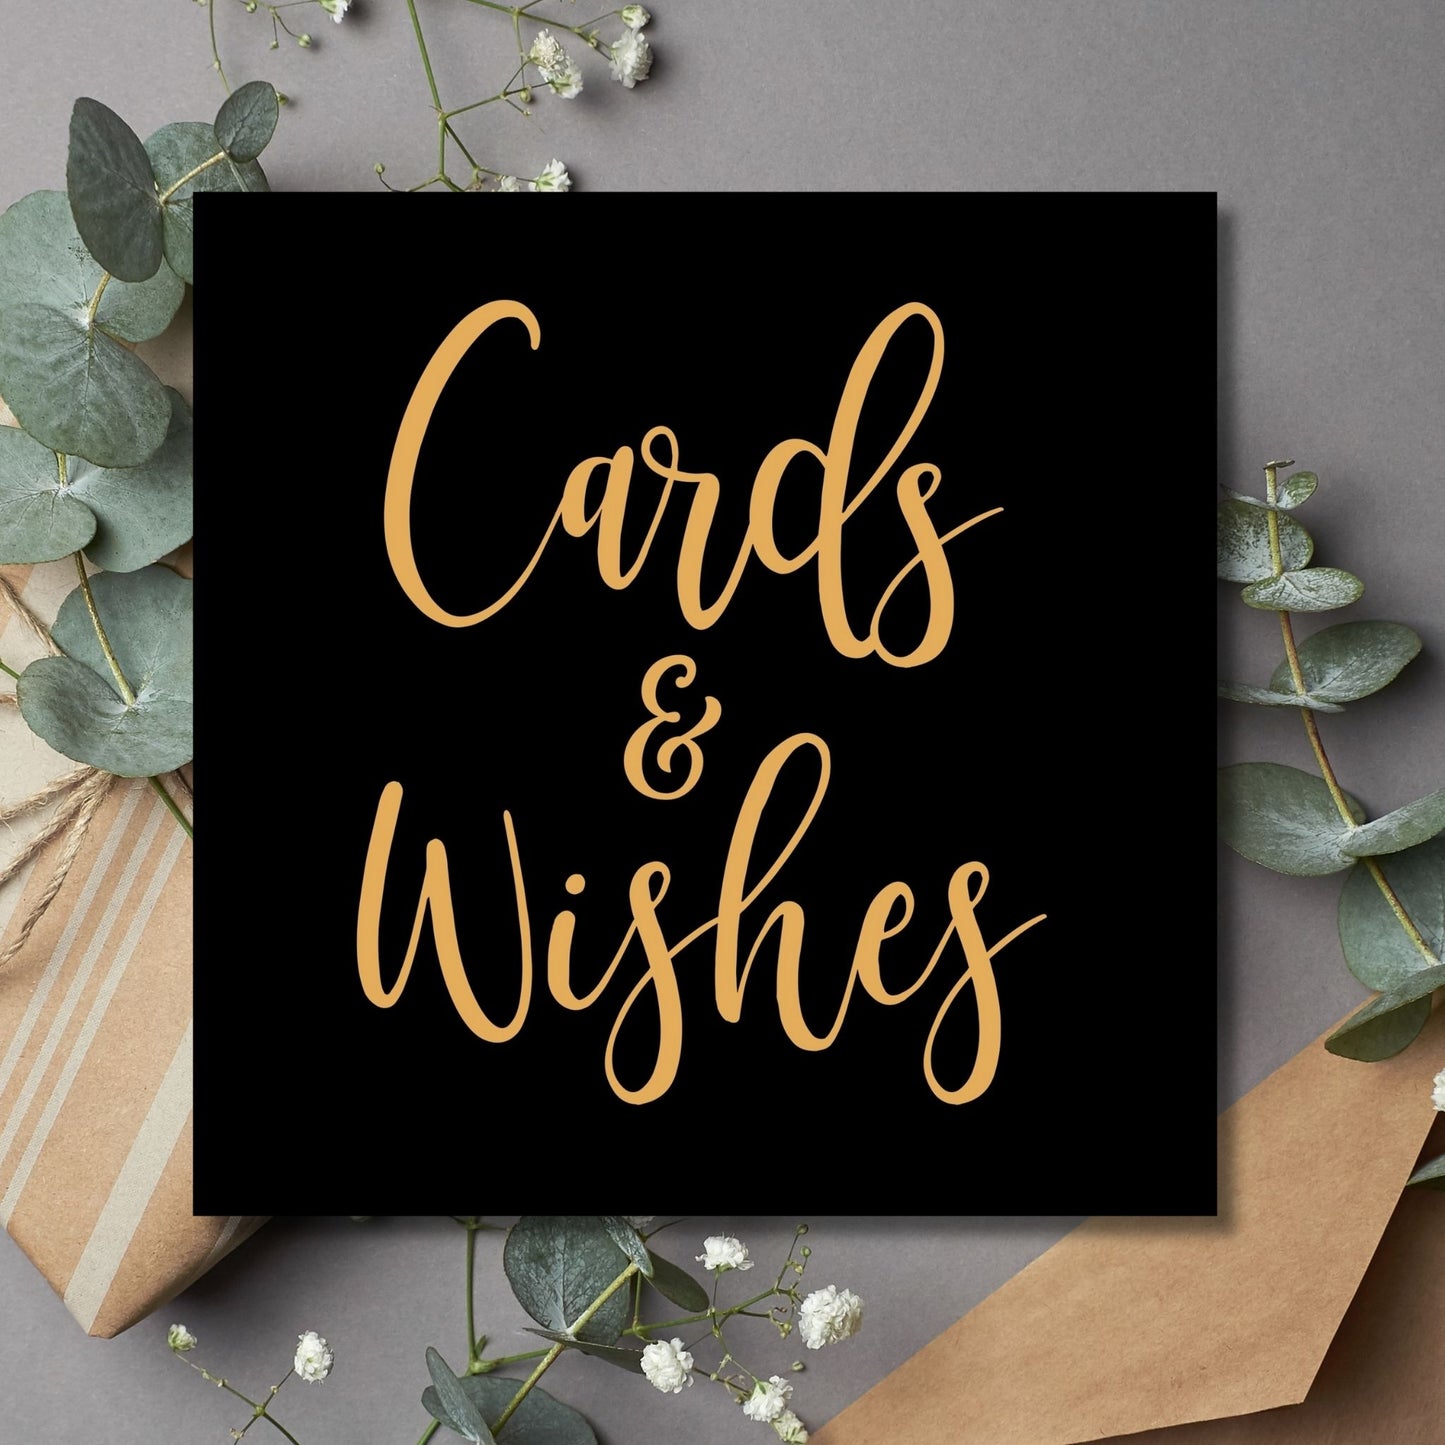 Cards and Wishes Wedding Reception Sign